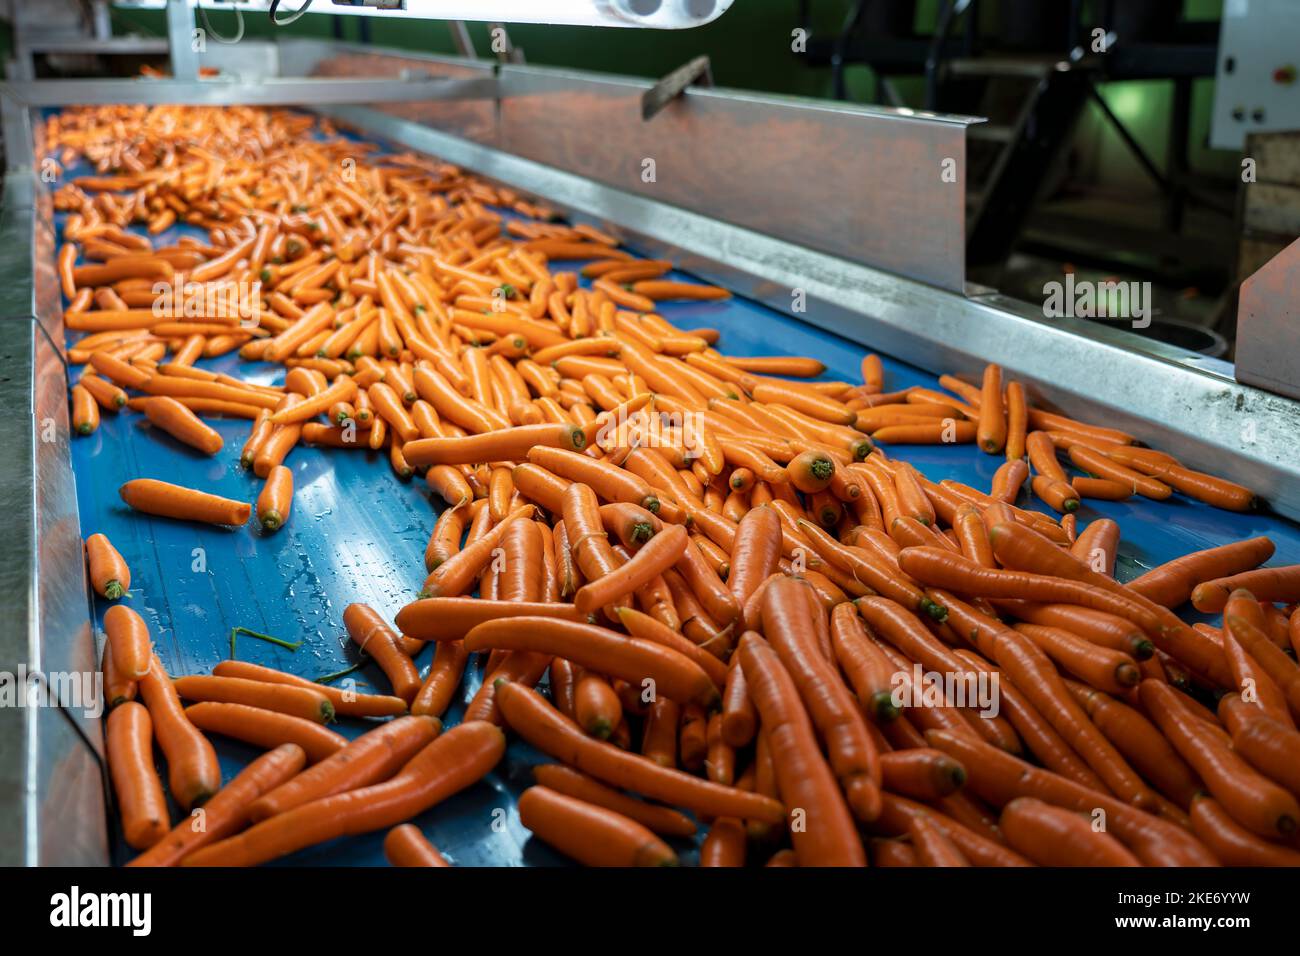 Washed Carrots Moving On Blue Conveyor Belt In Food Processing Plant. Postharvest Handling Of Vegetables and Root Crops. Stock Photo